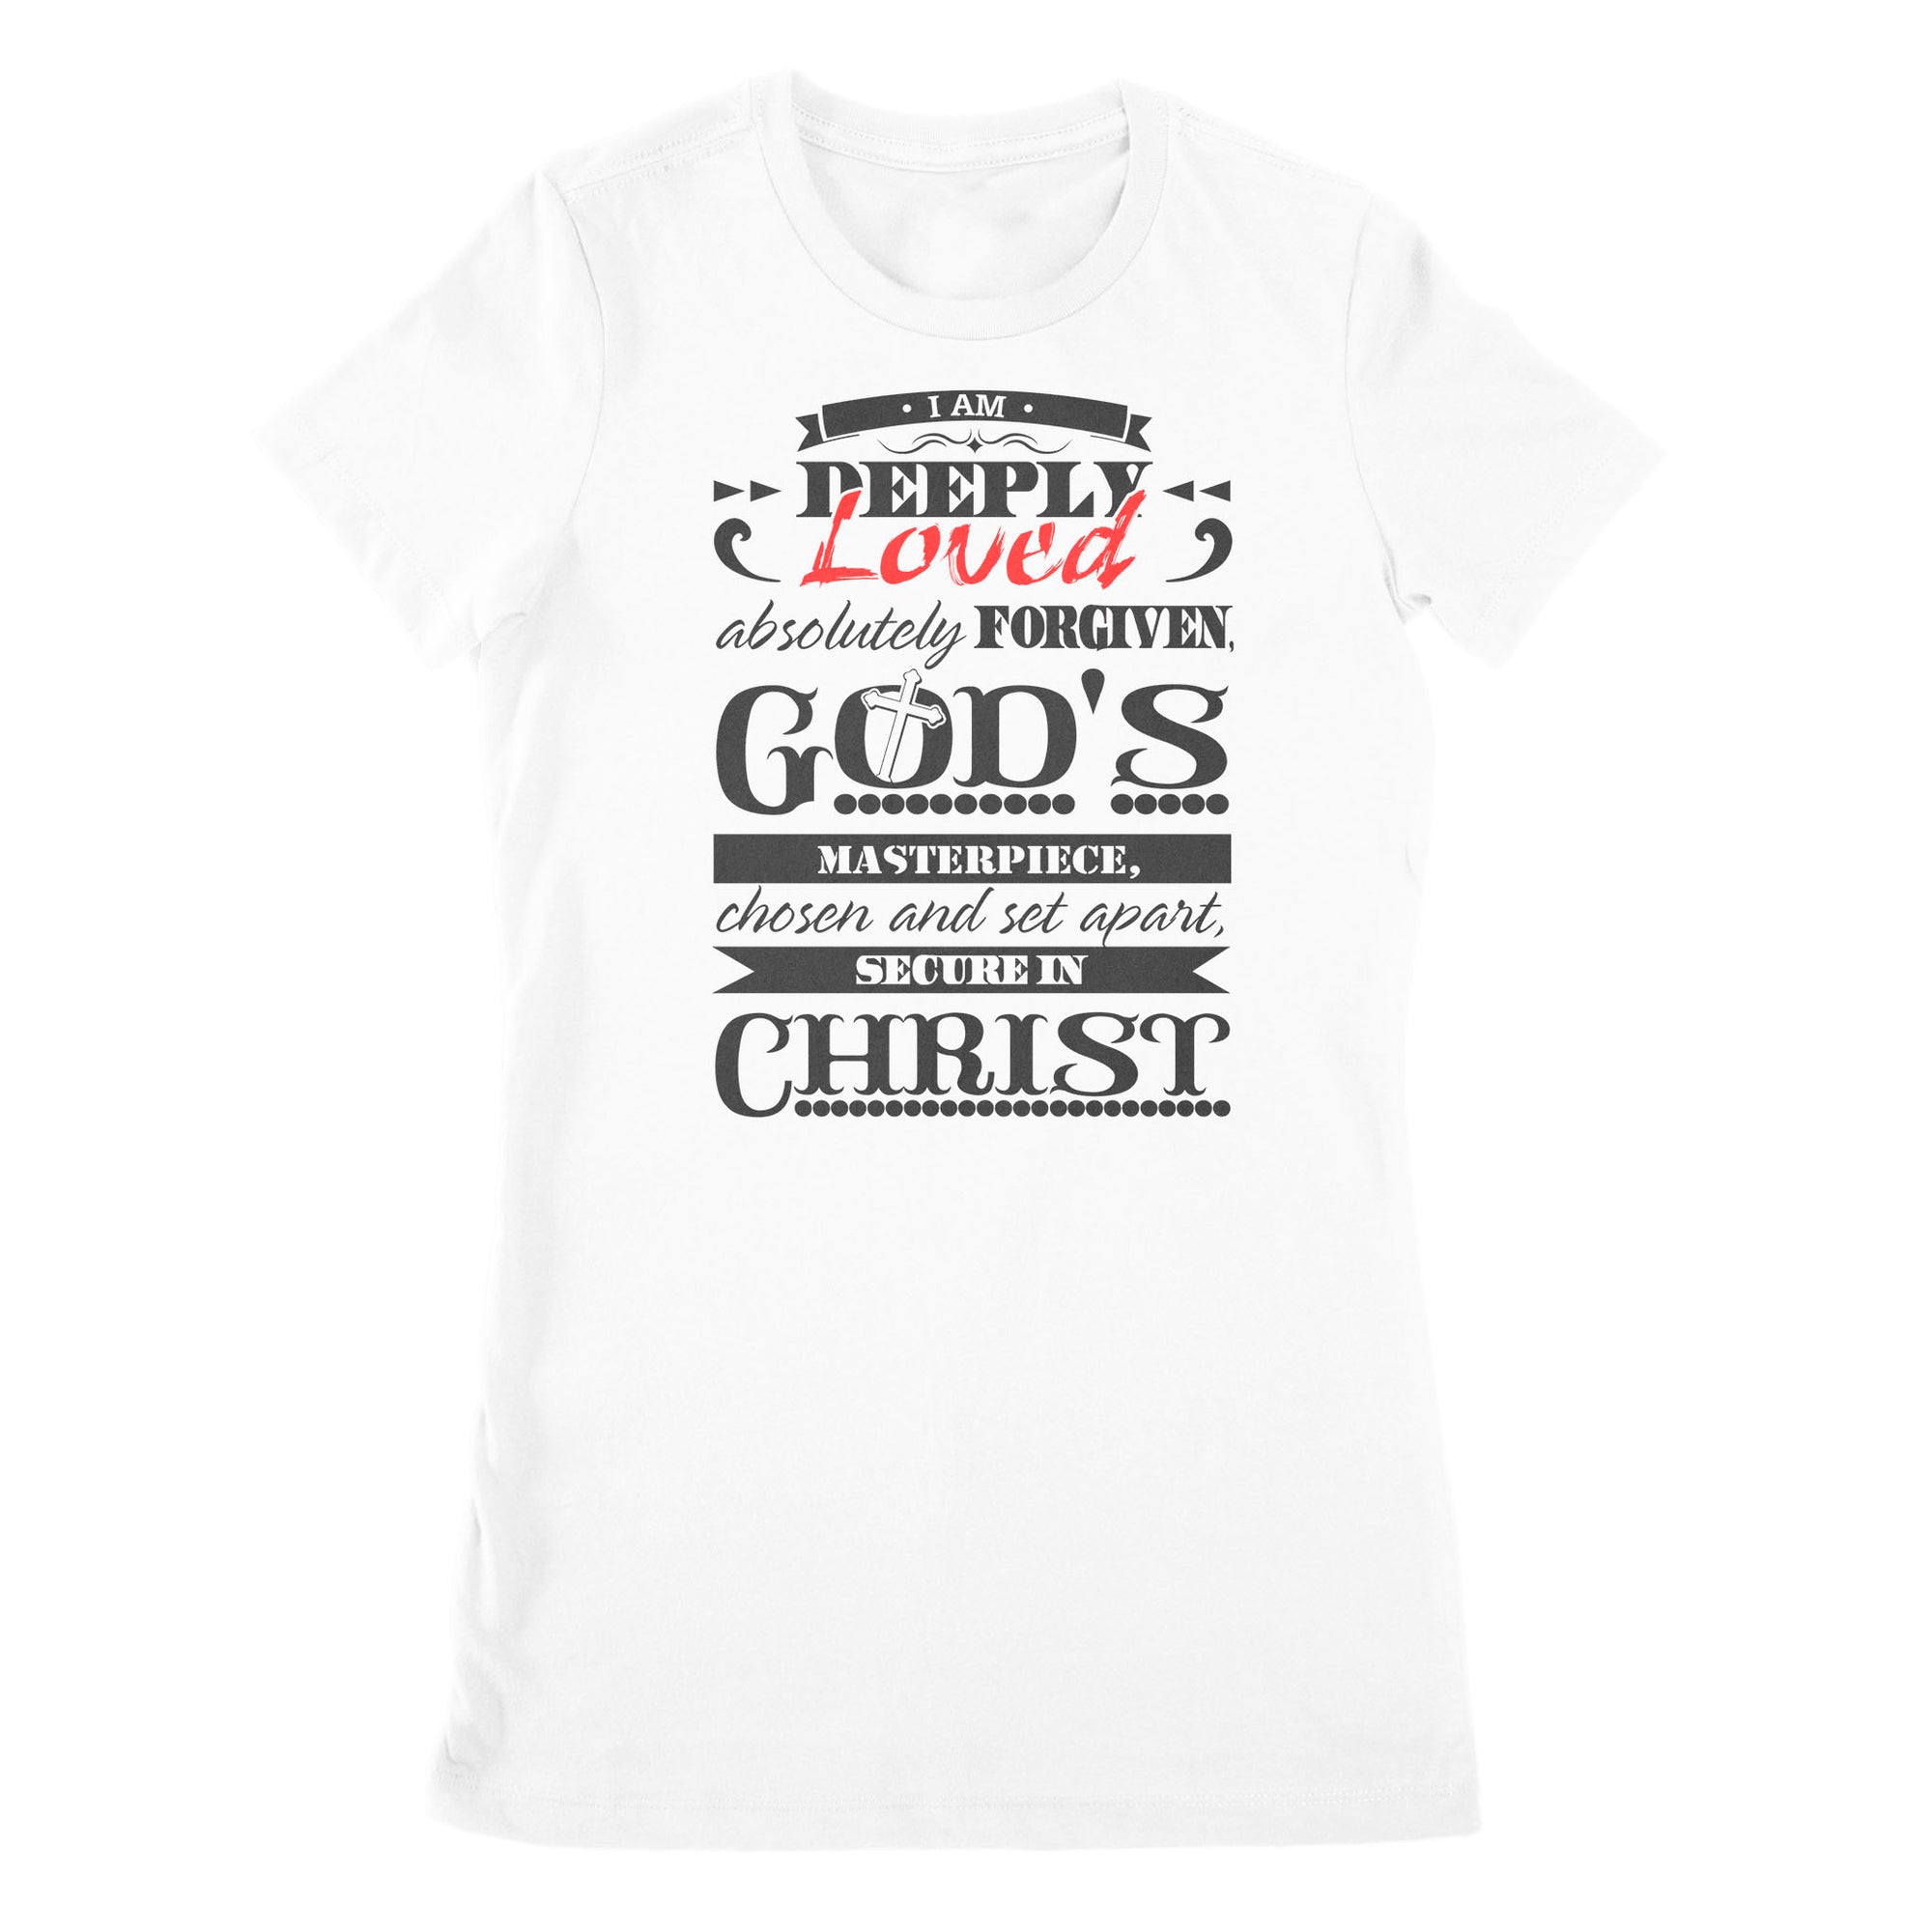 Premium Women's T-shirt - I Am Deeply Loved, Absolutely Forgiven, God's Masterpiece, Chosen and Set Apart, Secure in Christ